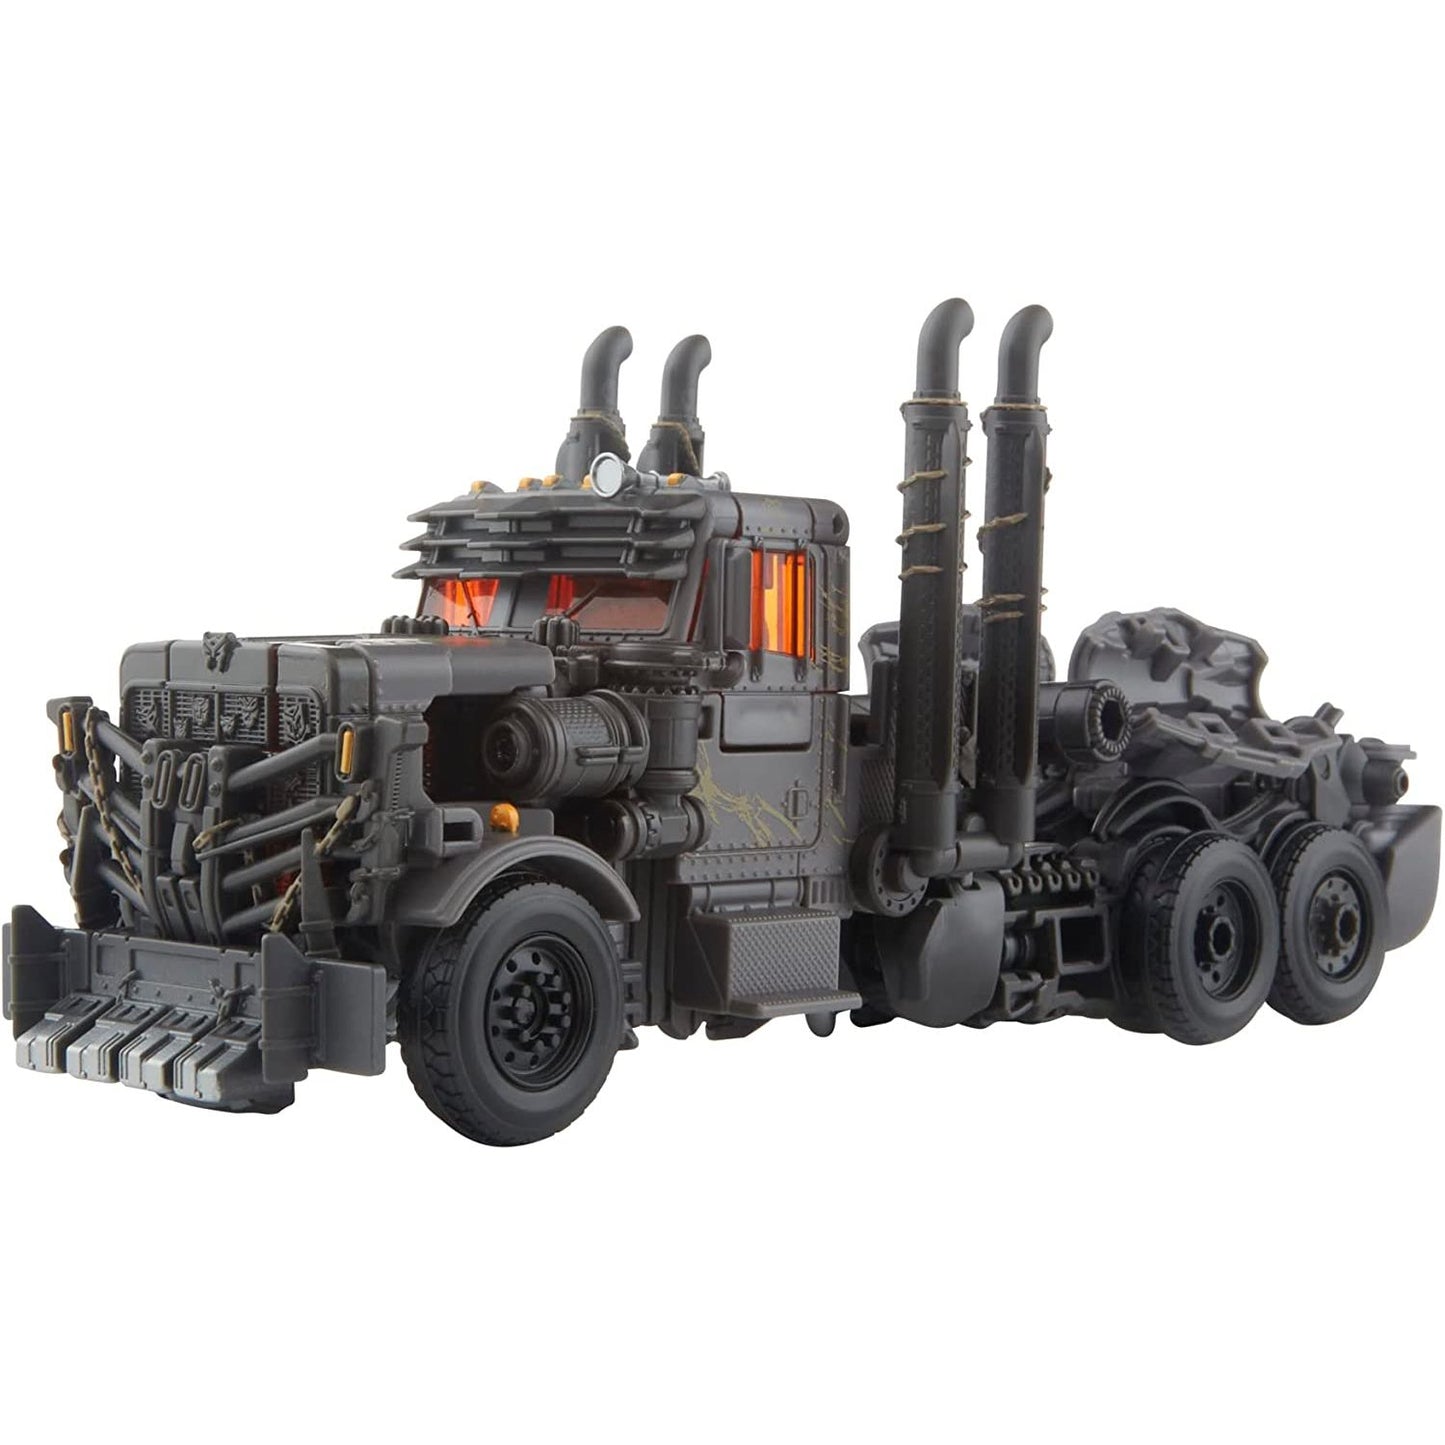 Transformers Studio Series Leader Class Rise of the Beasts Scourge Action Figure Toy